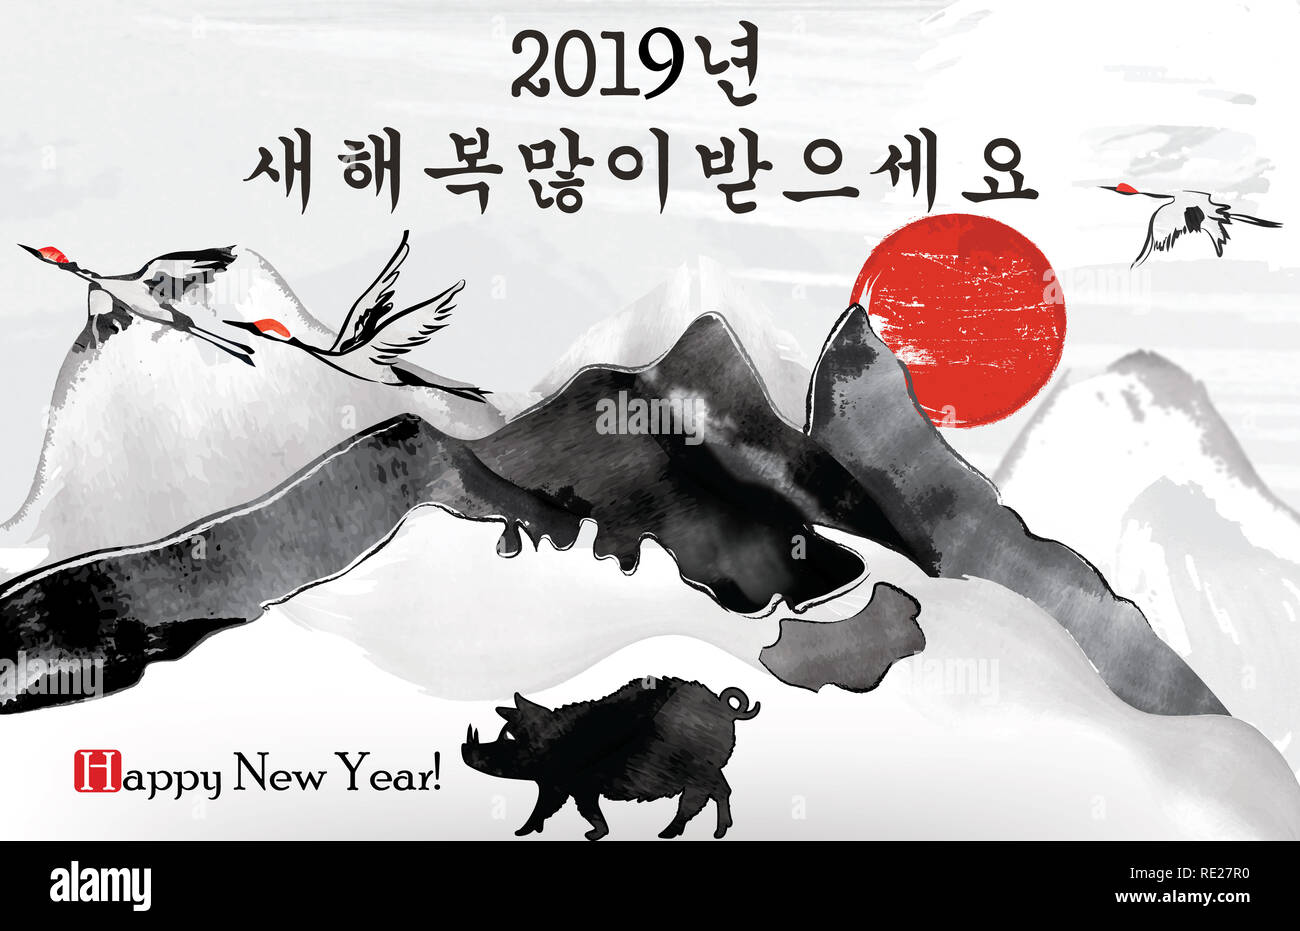 Vintage Style Korean Greeting Card Designed For The Spring Festival Lunar New Year Of The Earth Boar Celebration Text Happy New Year 19 Stock Photo Alamy